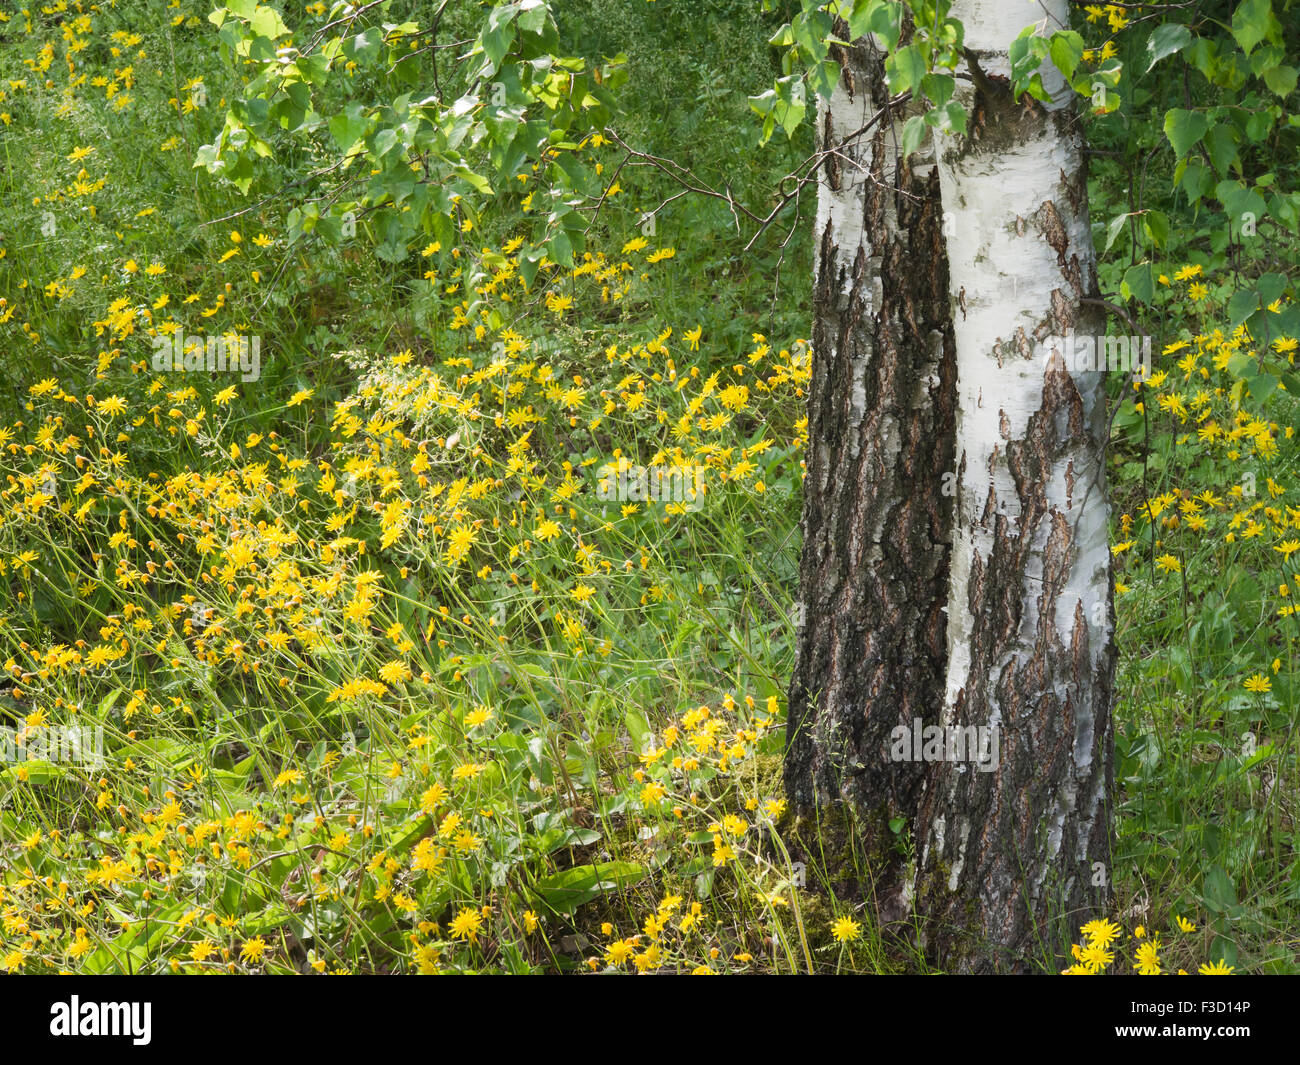 Impressions of summer, romantic and idyllic meadow with yellow flowers and black and white birch trunks, Oslo Norway Stock Photo